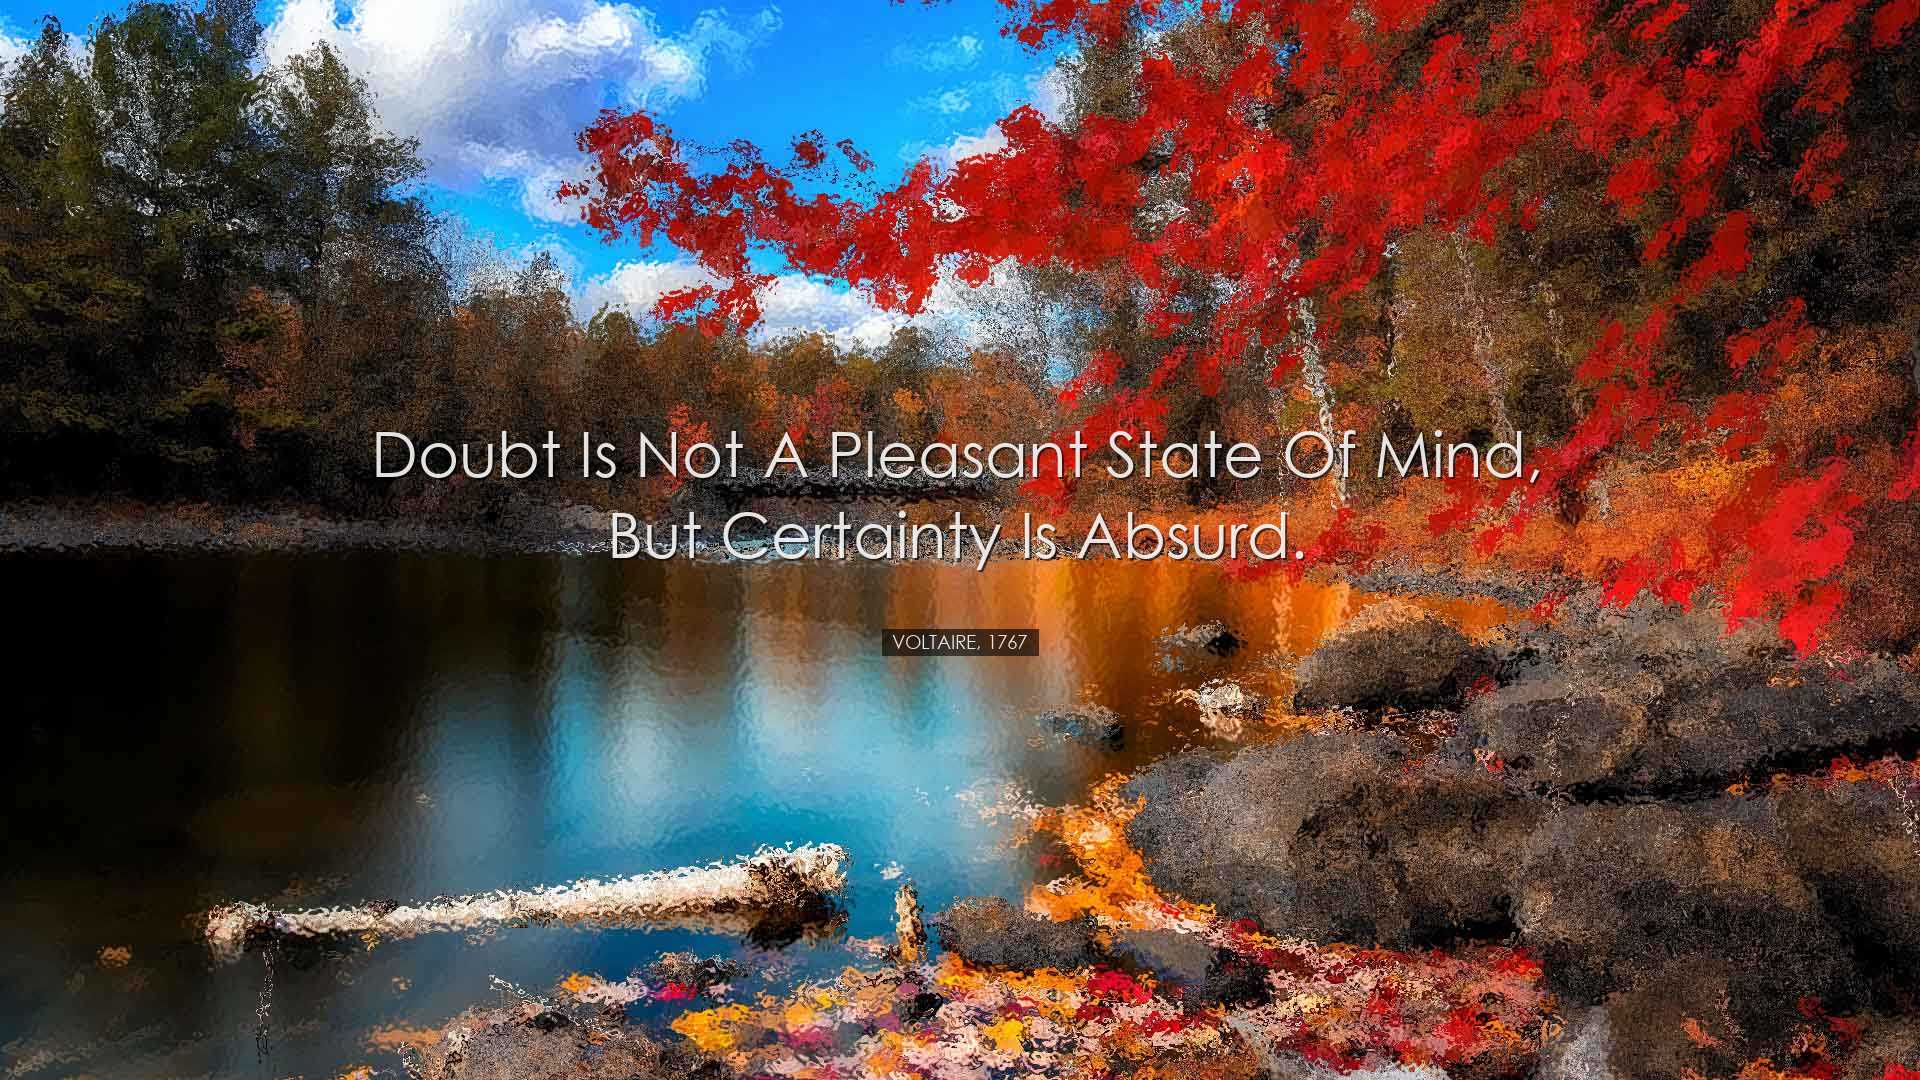 Doubt is not a pleasant state of mind, but certainty is absurd. -